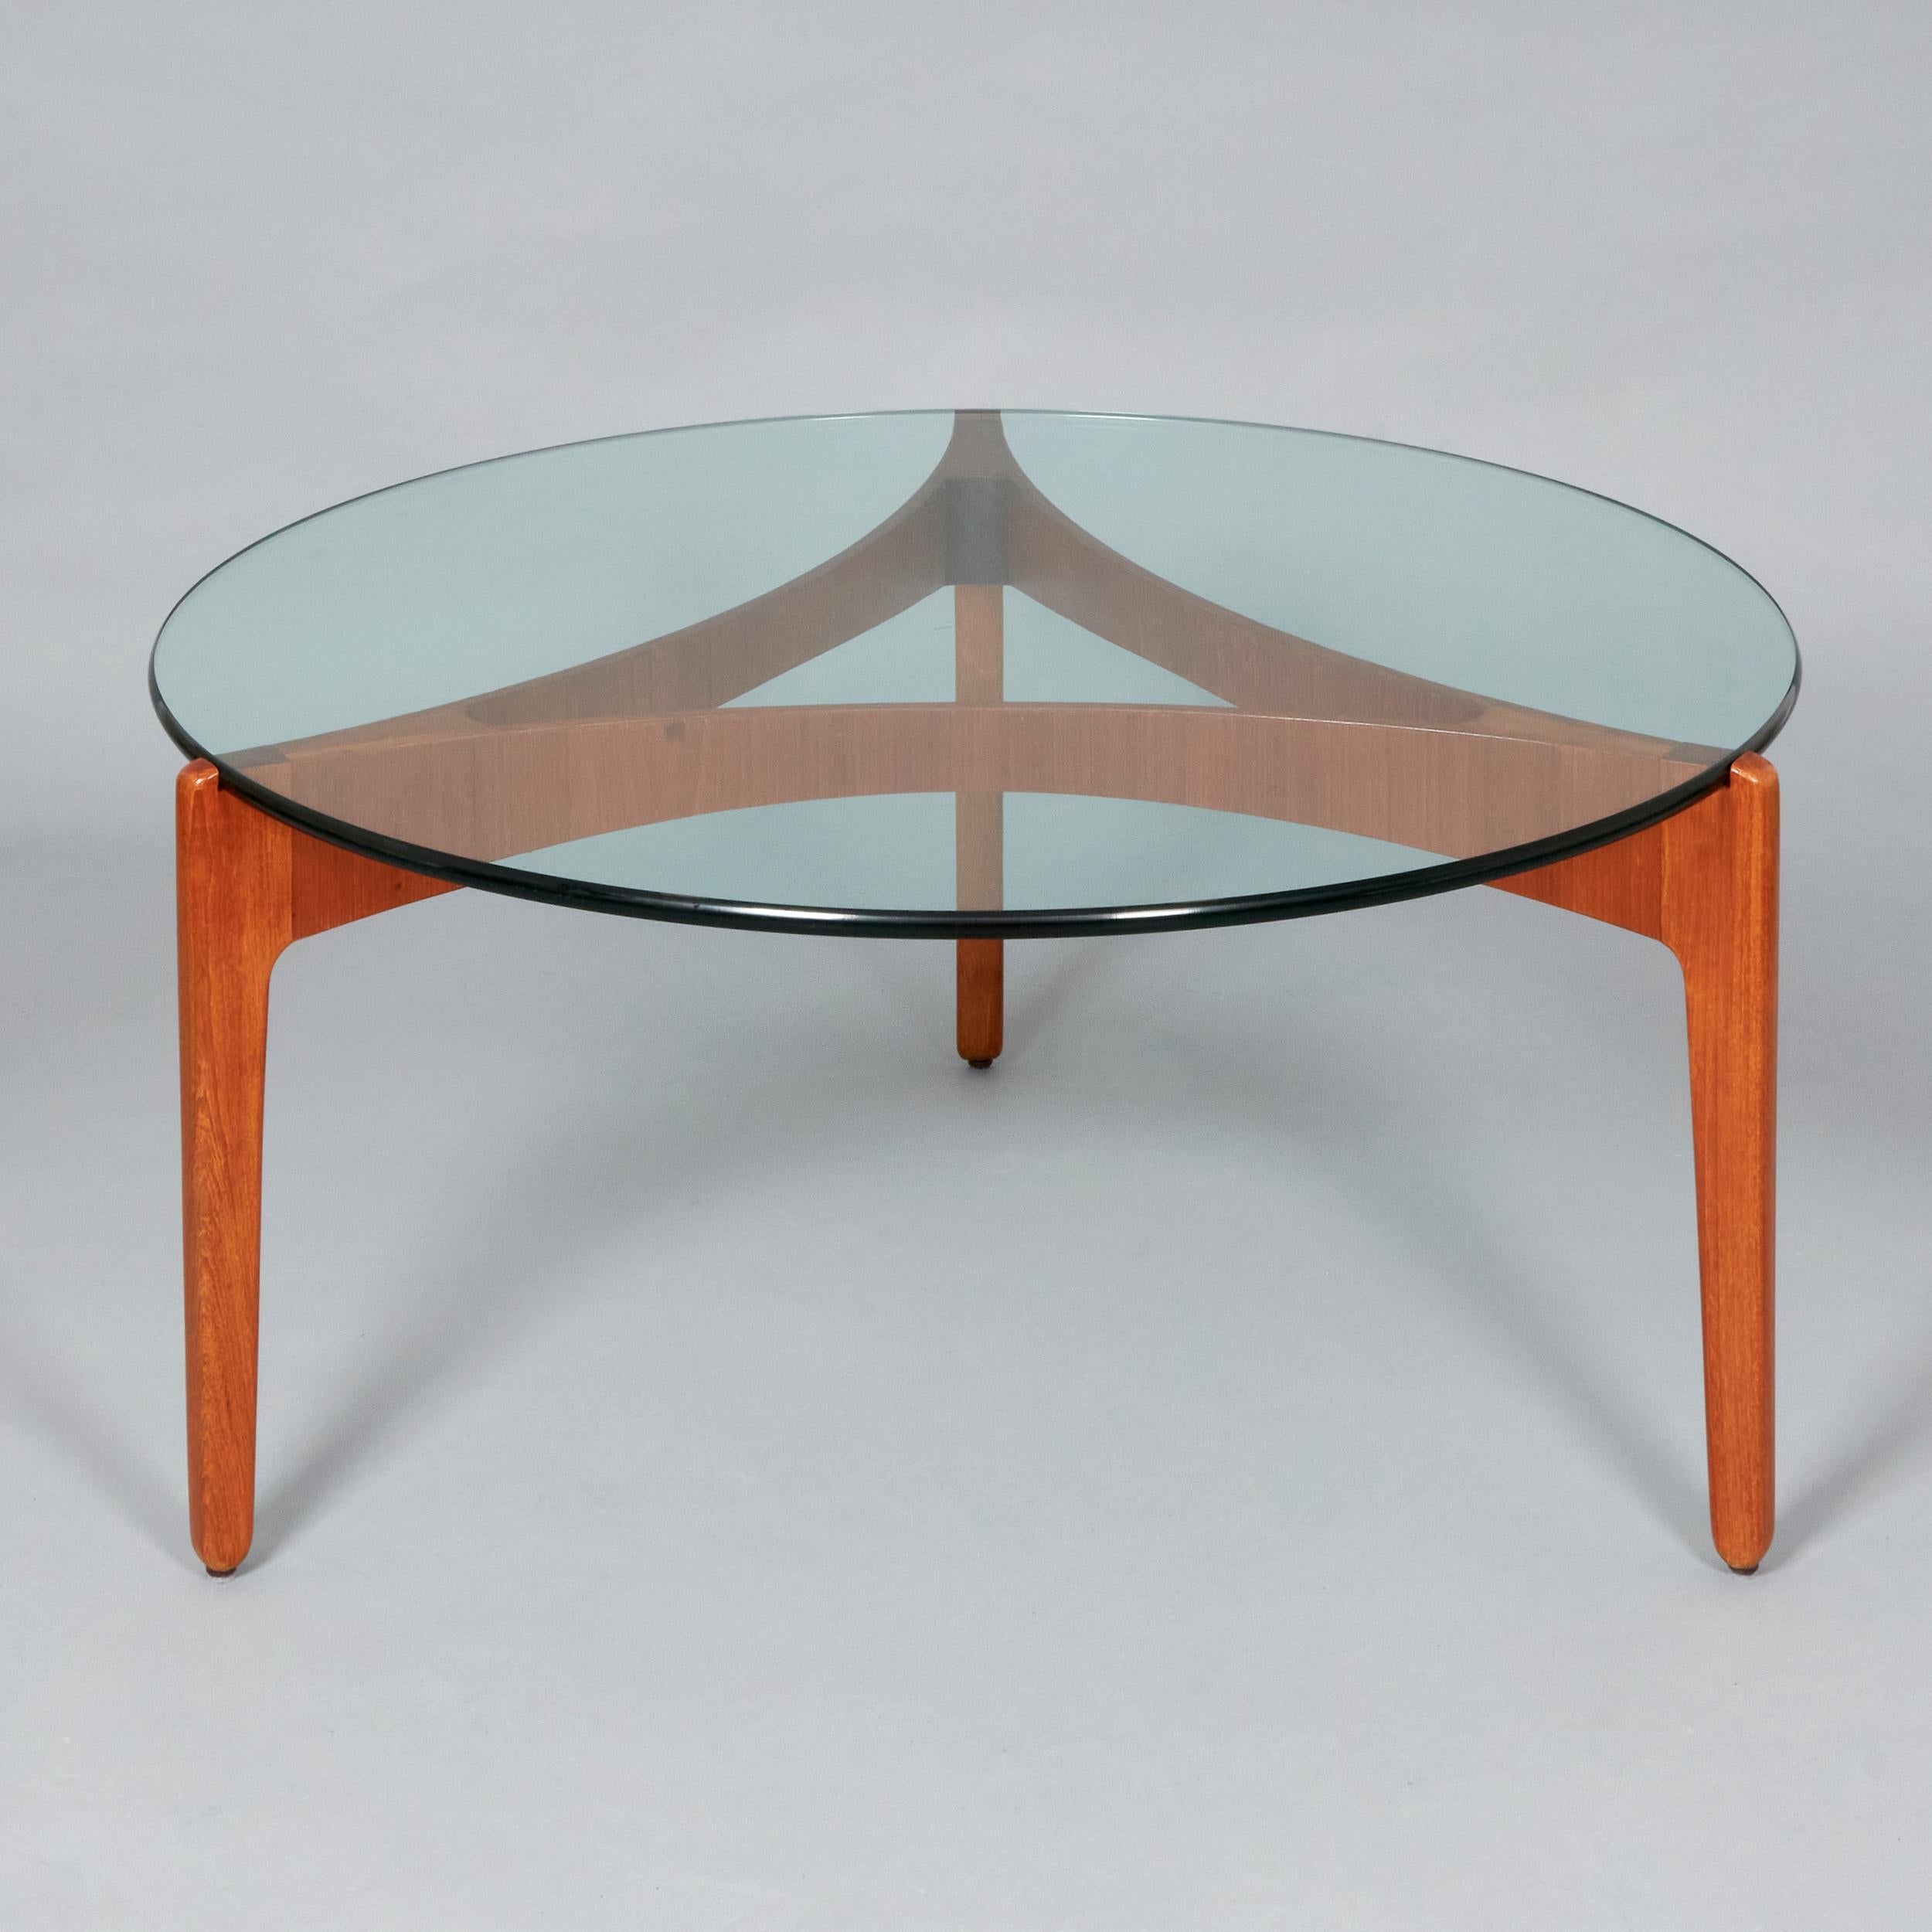 Round Coffee table in glass and Teak Plywood designed by Sven Ellekaer for Christian Linnebergs Møbelfabrik. Denmark, 1960s.
Excellent vintage condition, the wood is refinished though it may present unique traces of use and time. 

Bent plywood was